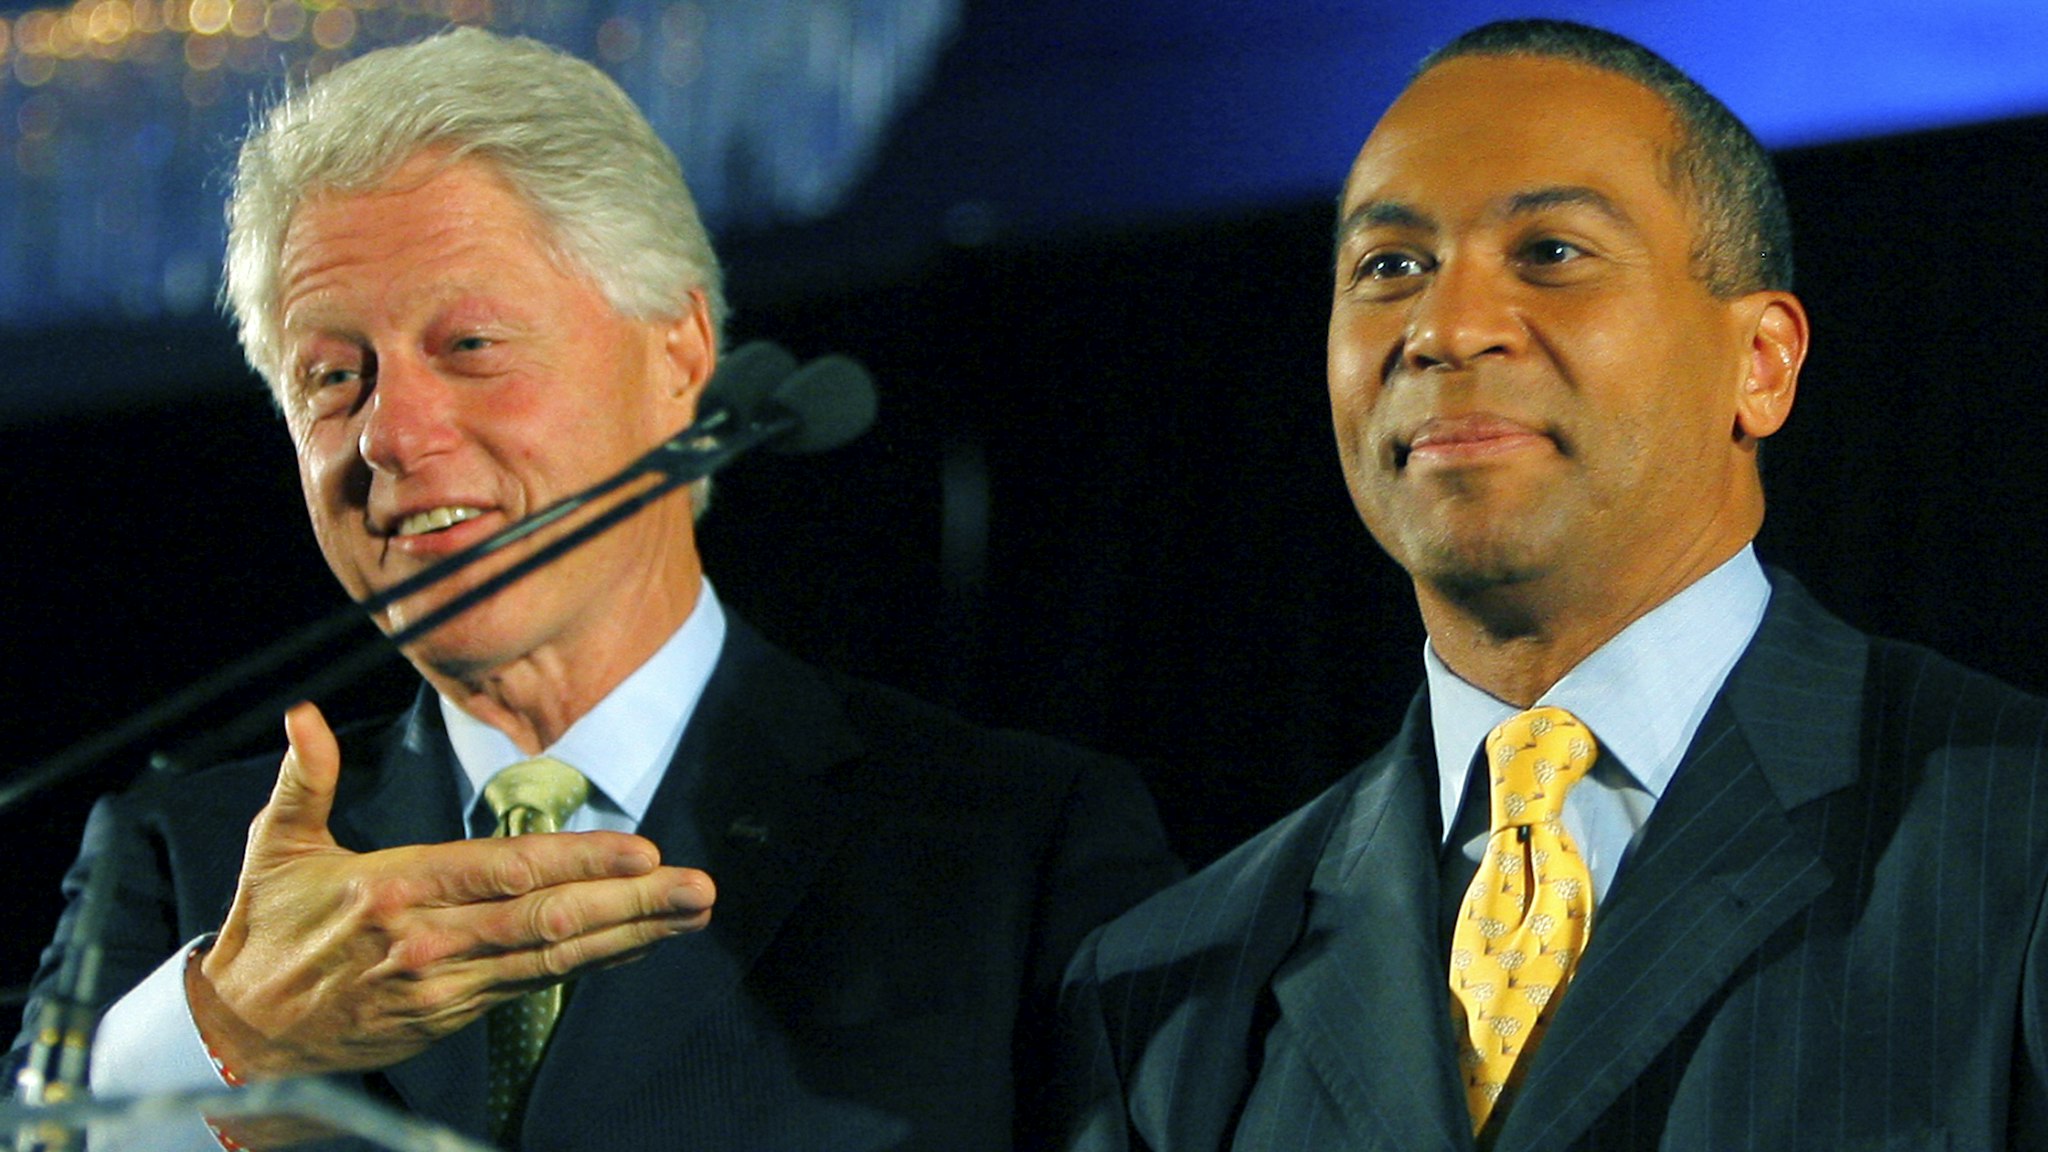 BOSTON - OCTOBER 16: Former president Bill Clinton, left, was on stage with democratic candidate for Governor of Massachusetts Deval Patrick, right.